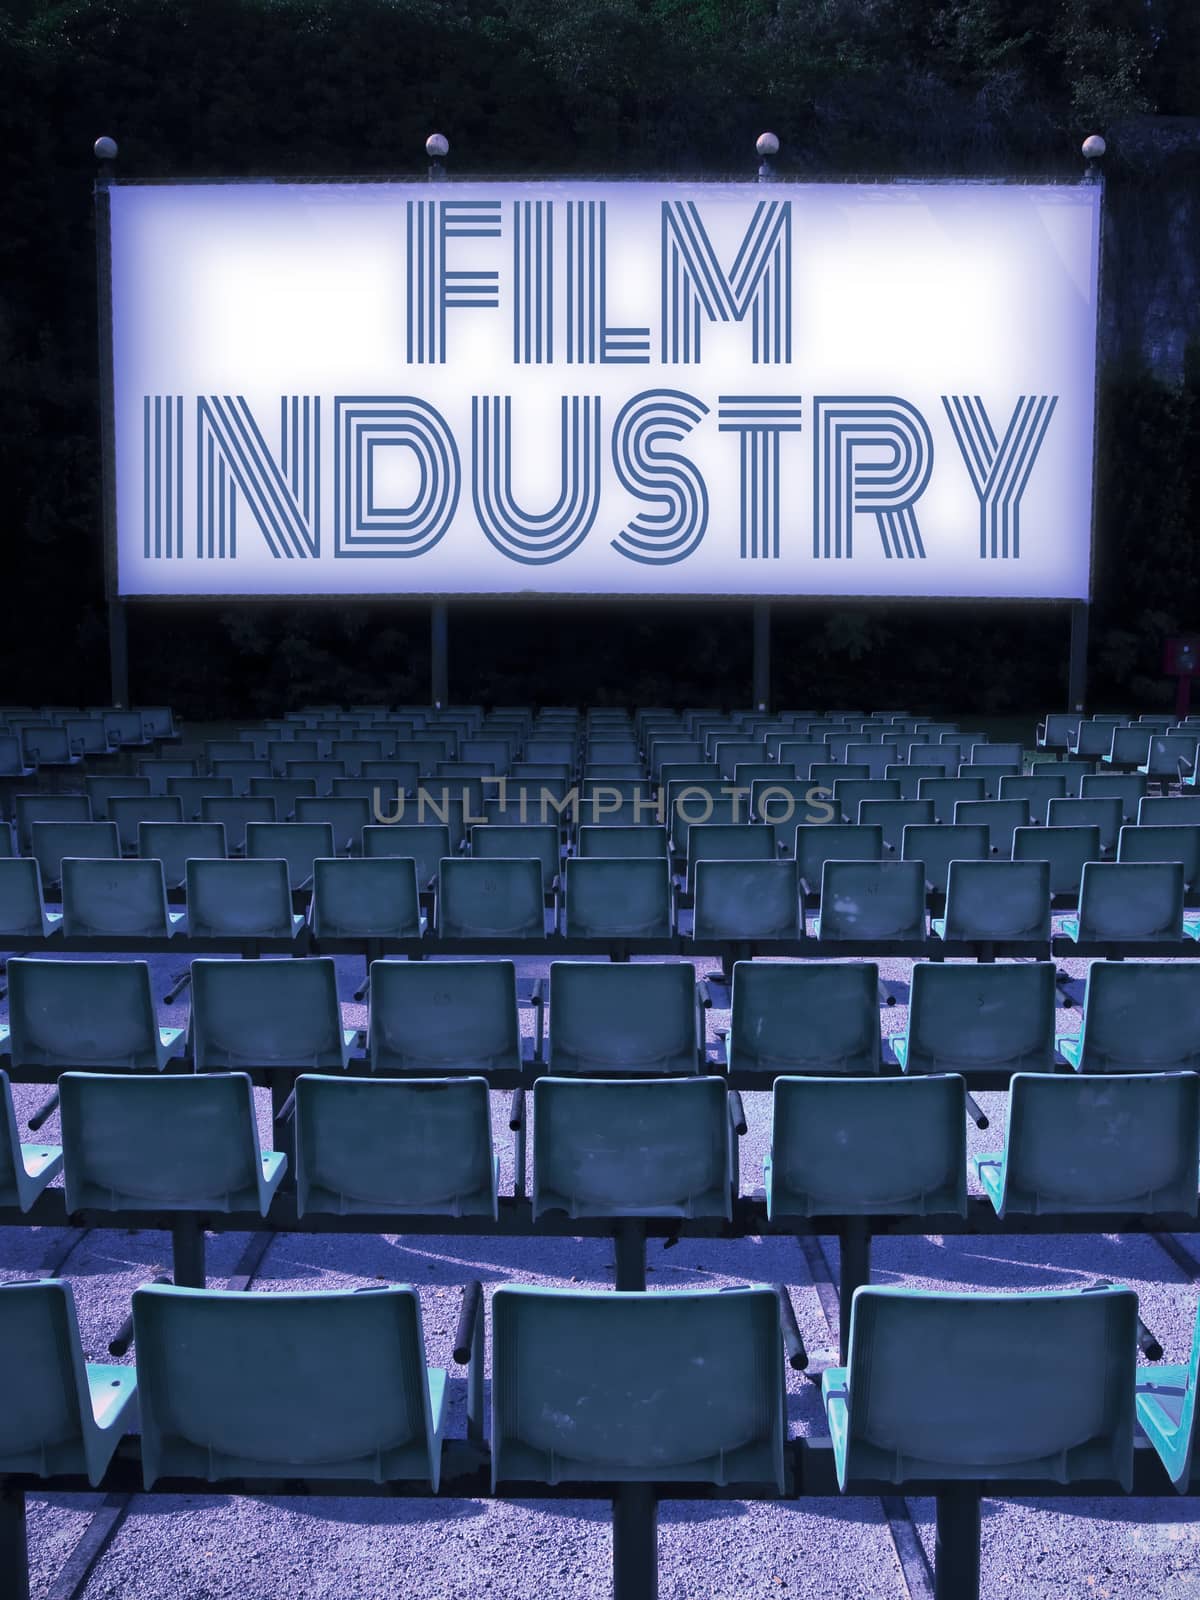 Outdoor cinema with plastic chairs in a row and Film Industry on screen - concept image.